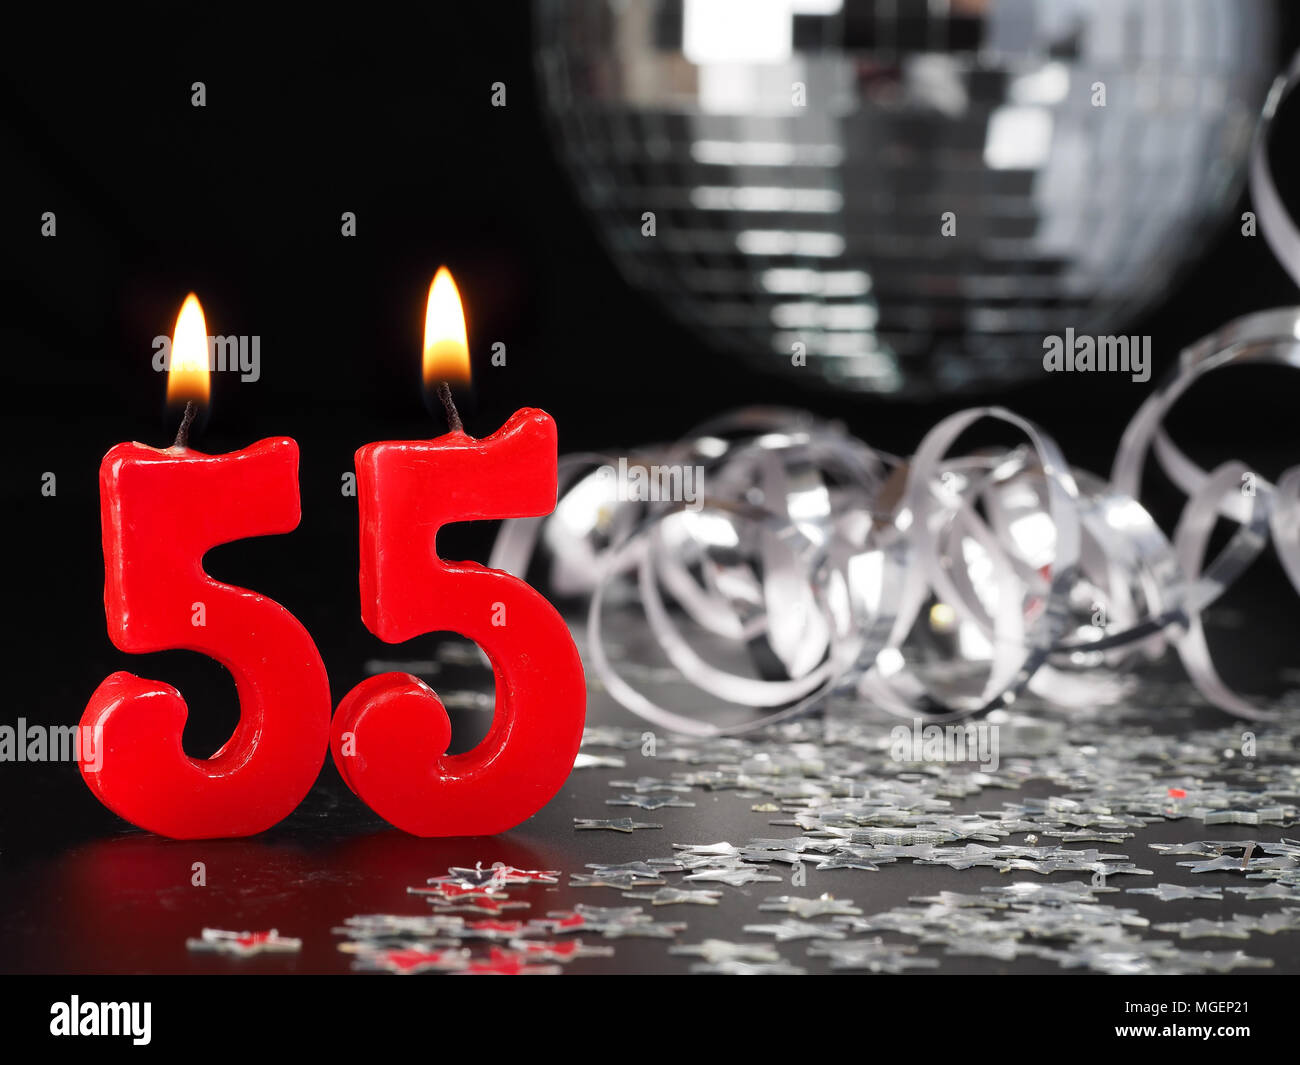 Red candles showing Nr. 55  Abstract Background for birthday or anniversary party. Stock Photo